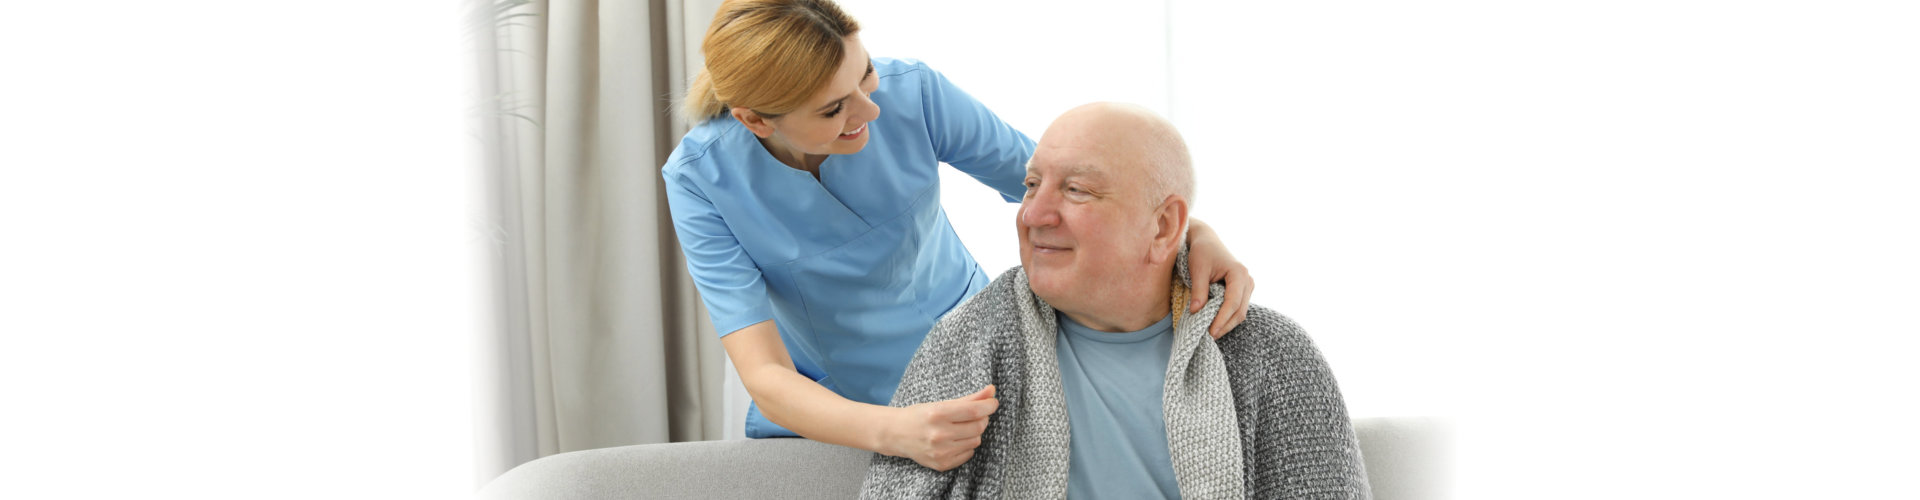 young nurse and old man smiling while facing each other